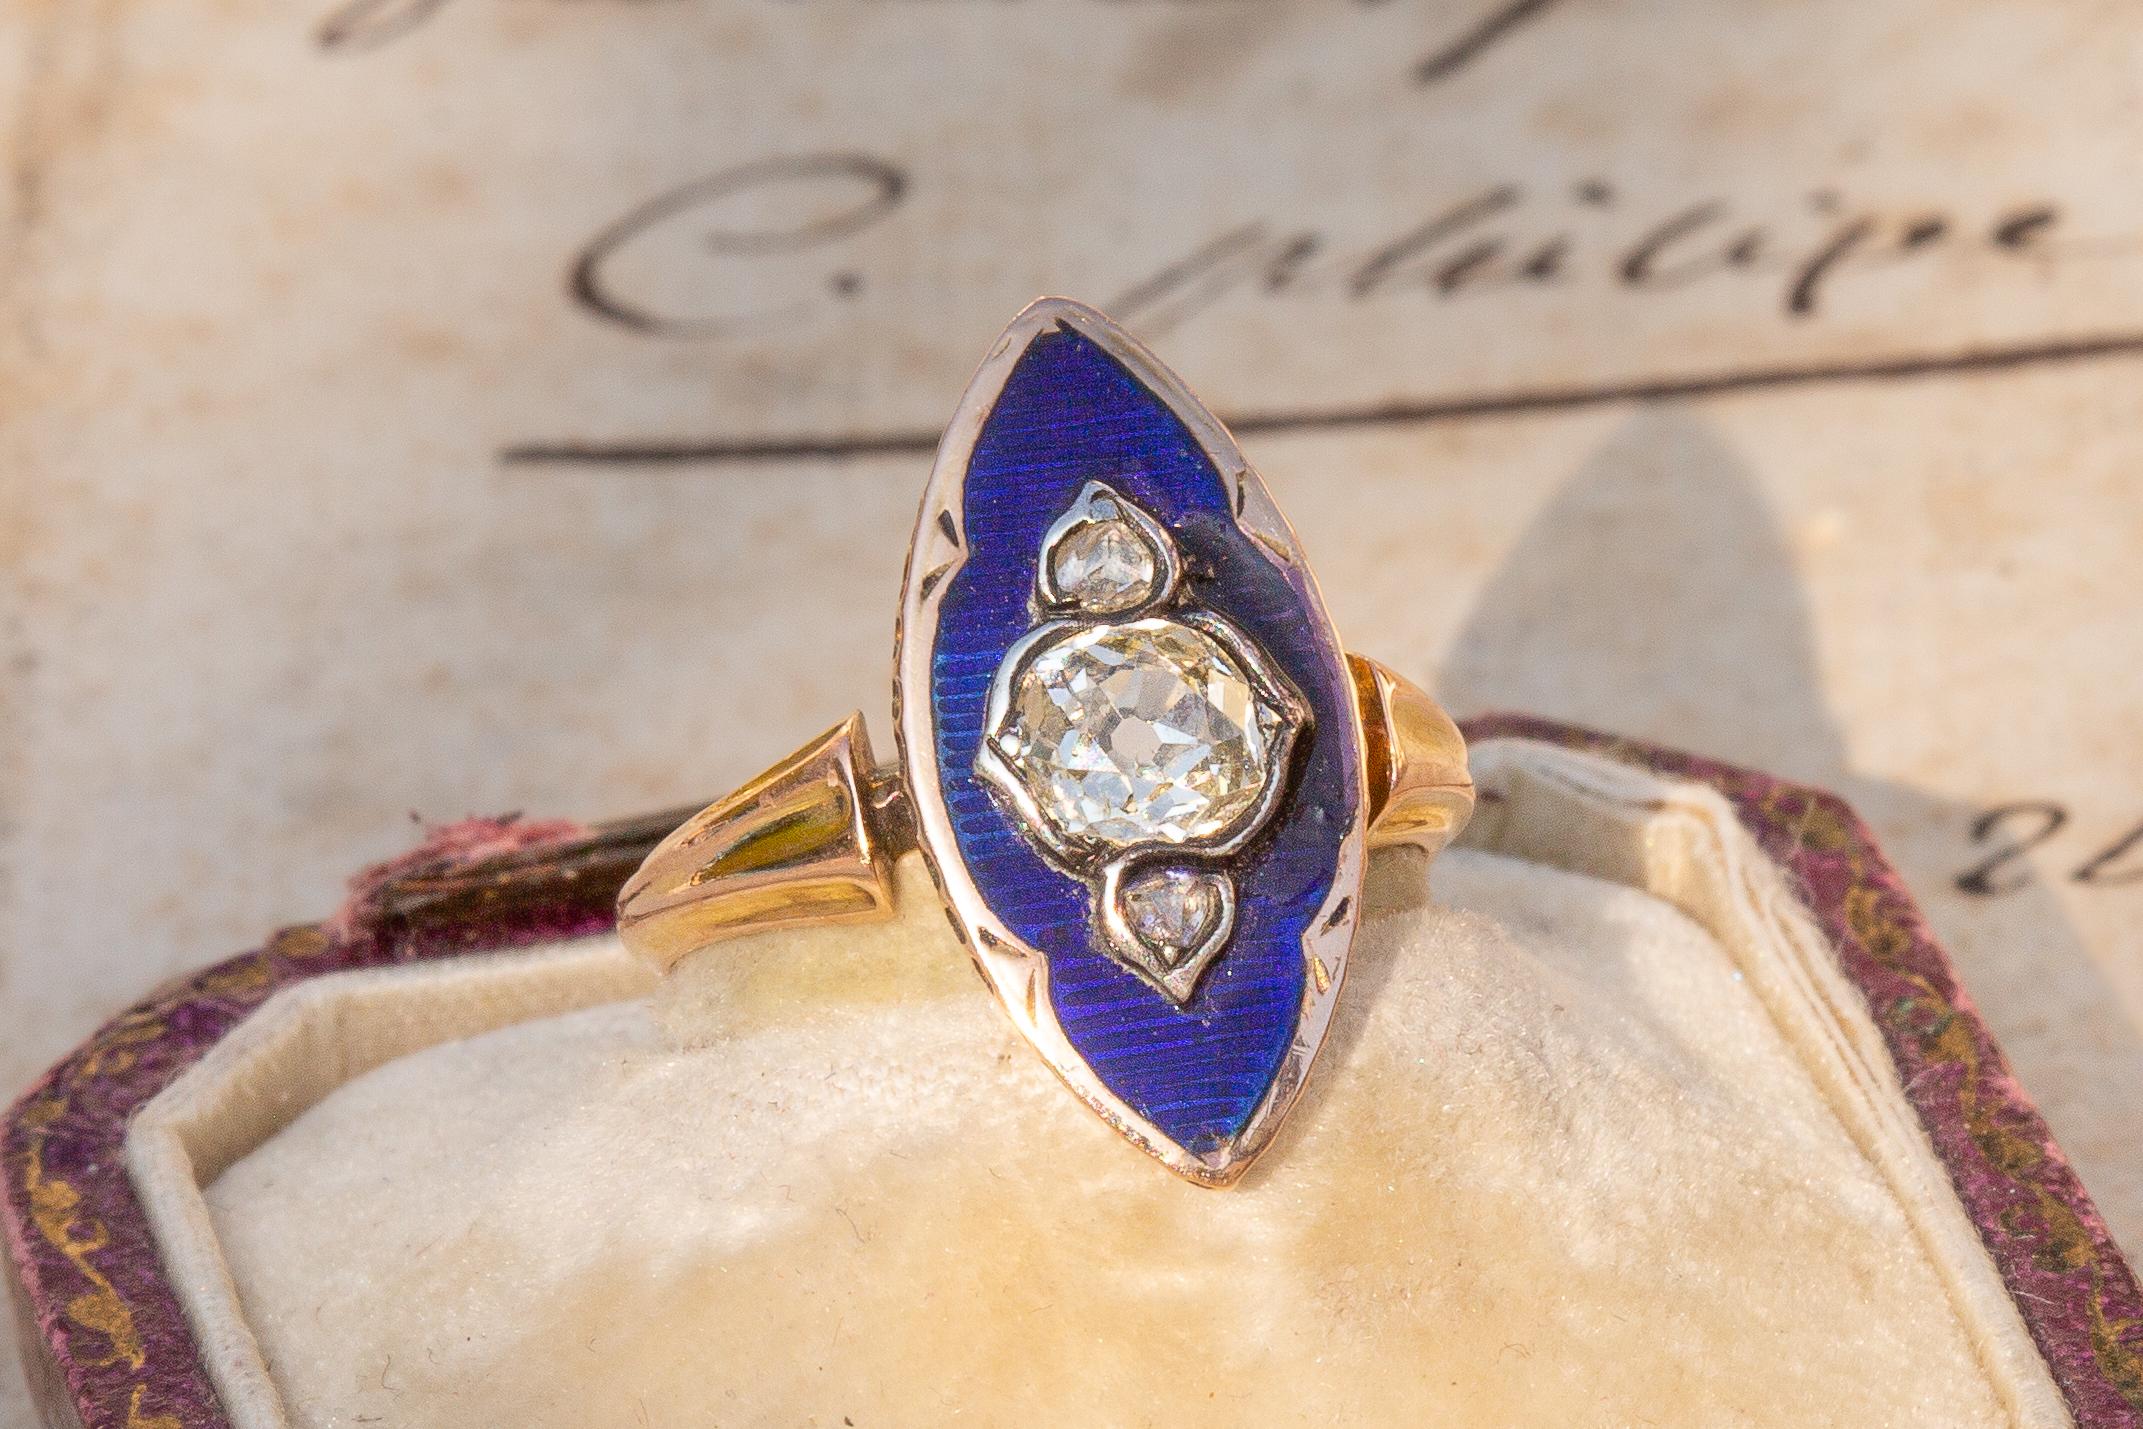 A delicate and beautifully handcrafted ring made in France during the very early 20th century, circa 1910. The design is inspired by late 18th century French ring types known as ‘firmament’ and ‘enfantement’ rings. The design was made popular by